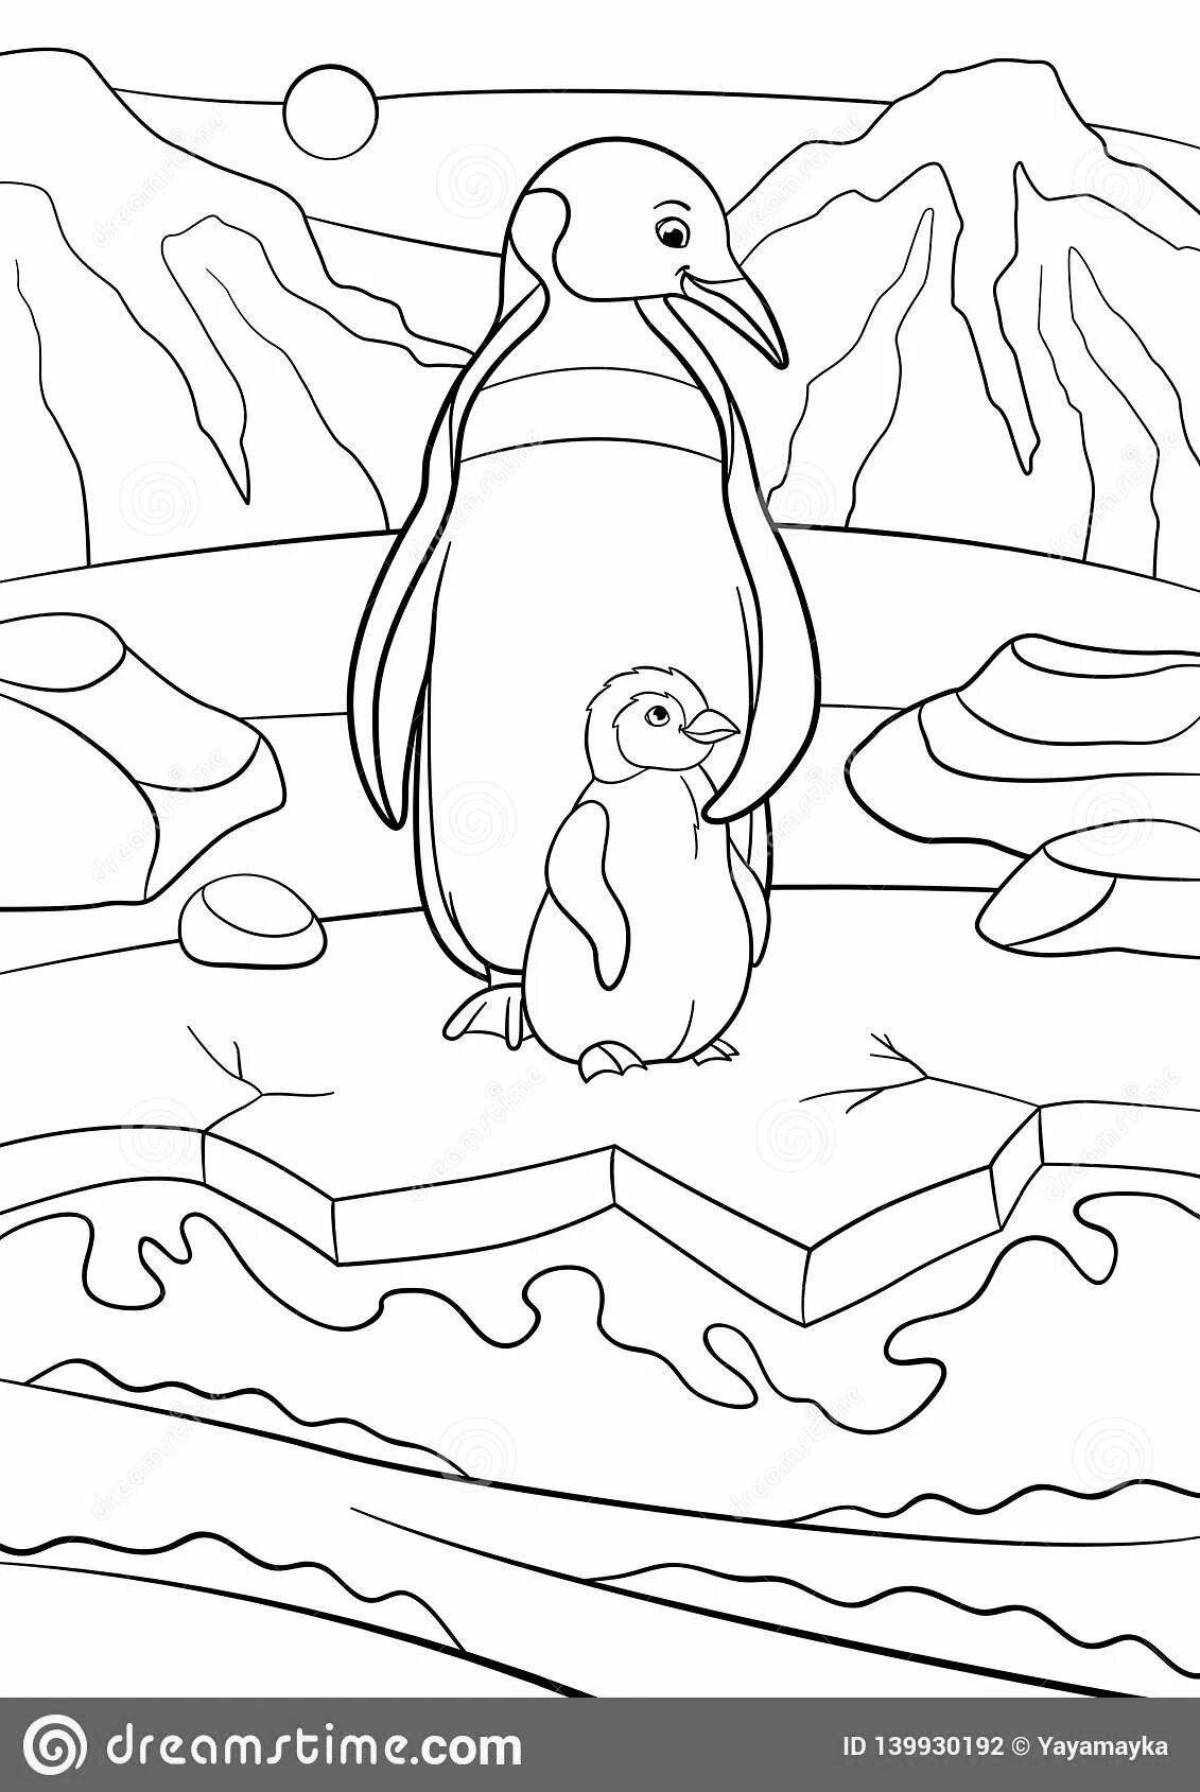 Fun coloring pages of Antarctica animals for kids